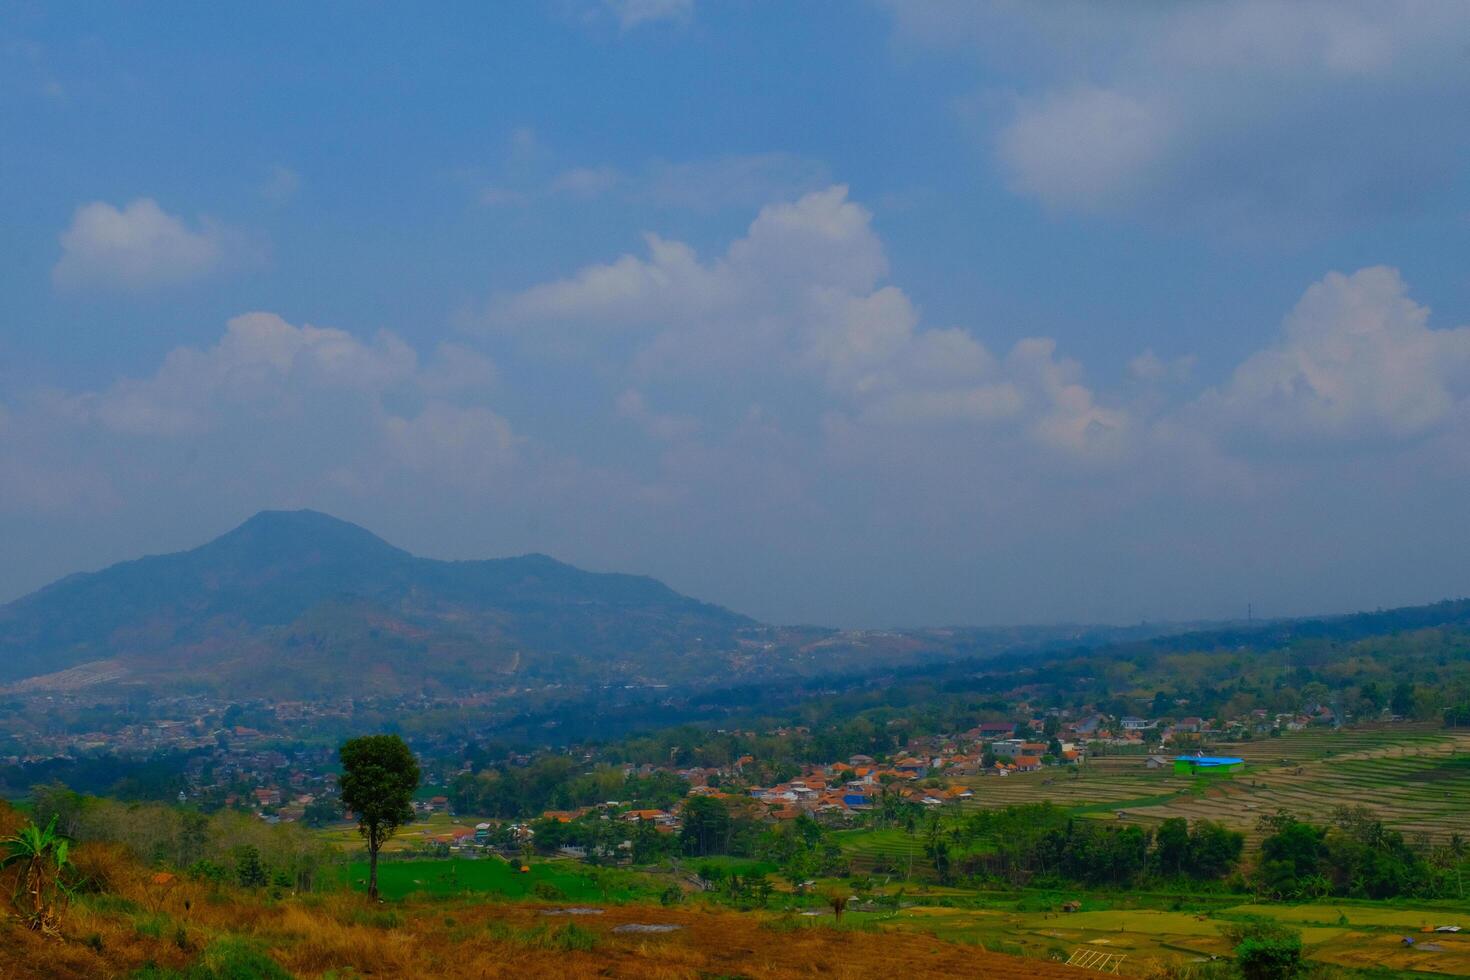 Landscape Photography. Landscape View. Scenic Nature Green and fertile hillsides. Beautiful hill landscape with blue sky background. Bandung, Indonesia photo